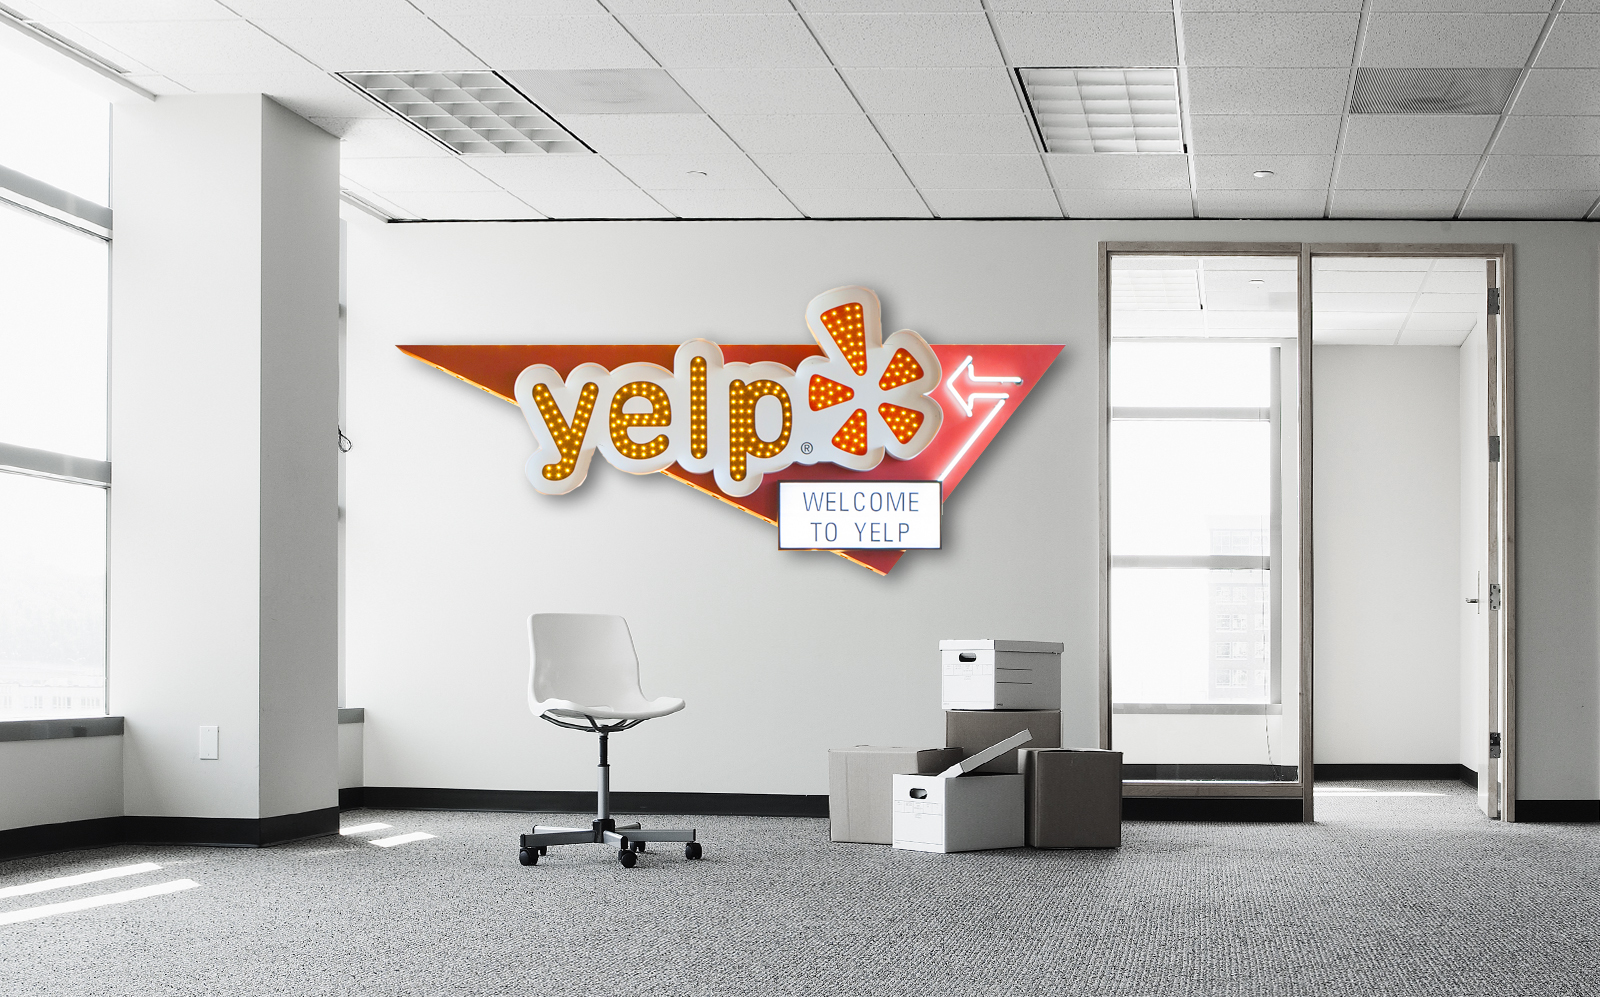 Yelp is expected to sublease some of their current offices. (Yelp, Getty)